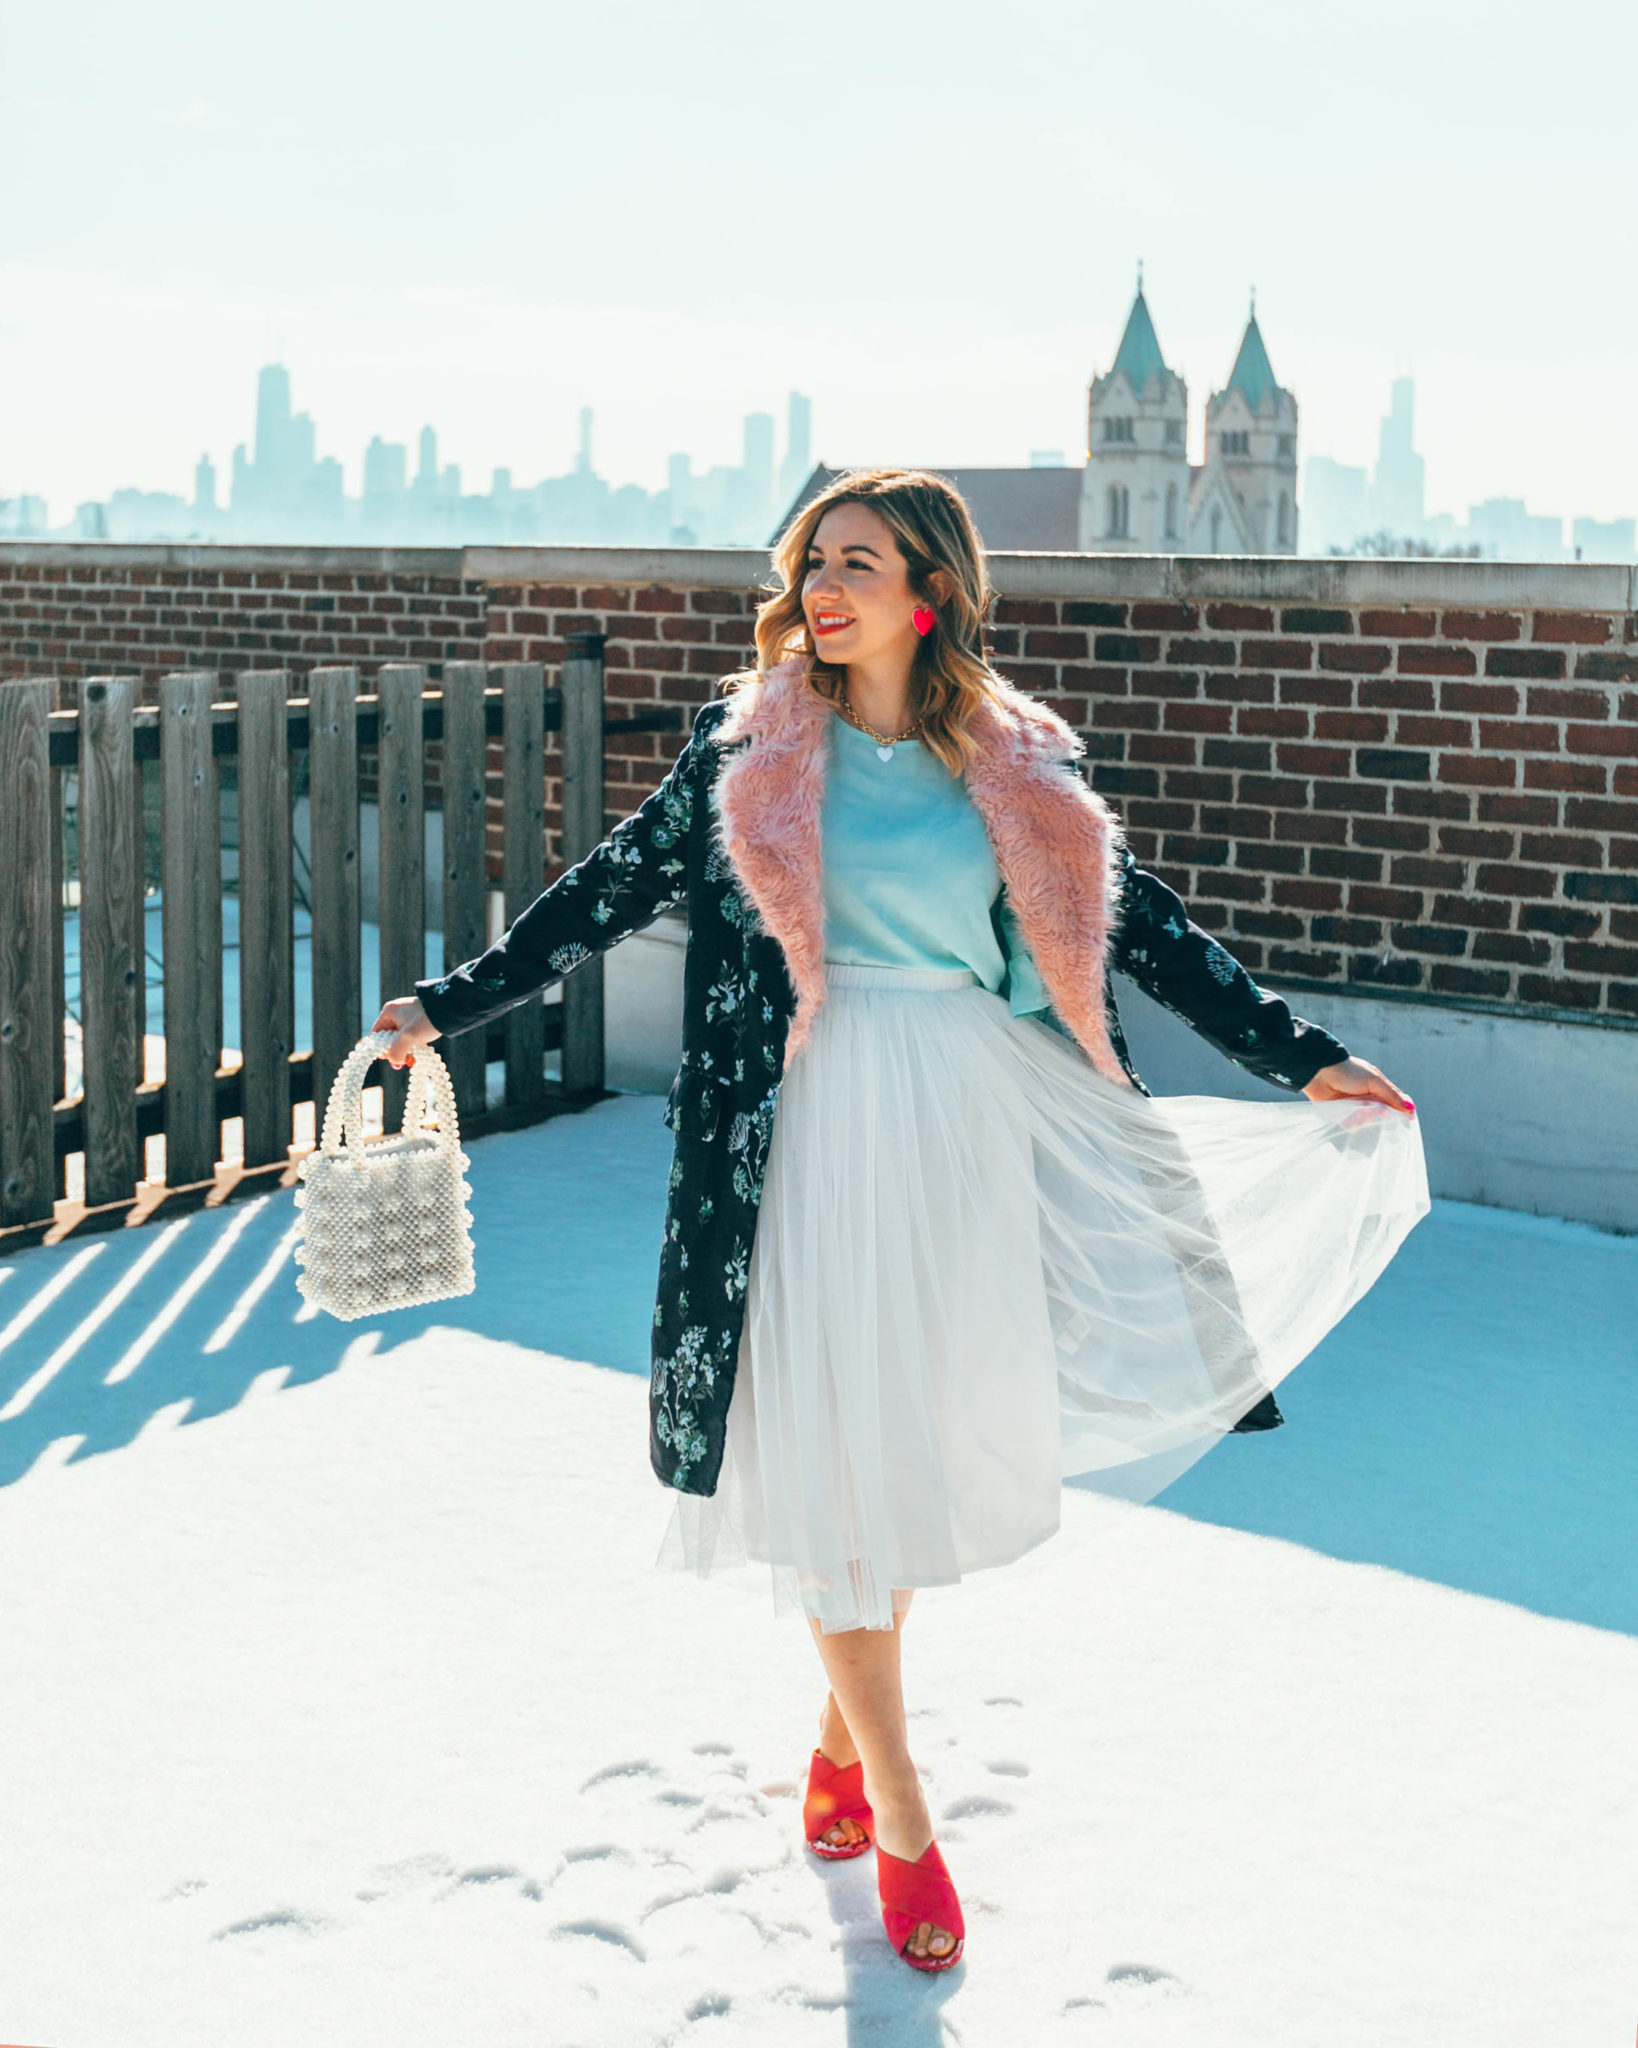 White tulle skirt styled by top US fashion blog, Glass of Glam: image of a woman wearing an ASOS white tulle skirt, SheIn Aqua top, Amazon pink sandals, Rent the Runway floral coat, BaubleBar heart pendant necklace, Baublebar heat earrings and an Amazon beaded handbag